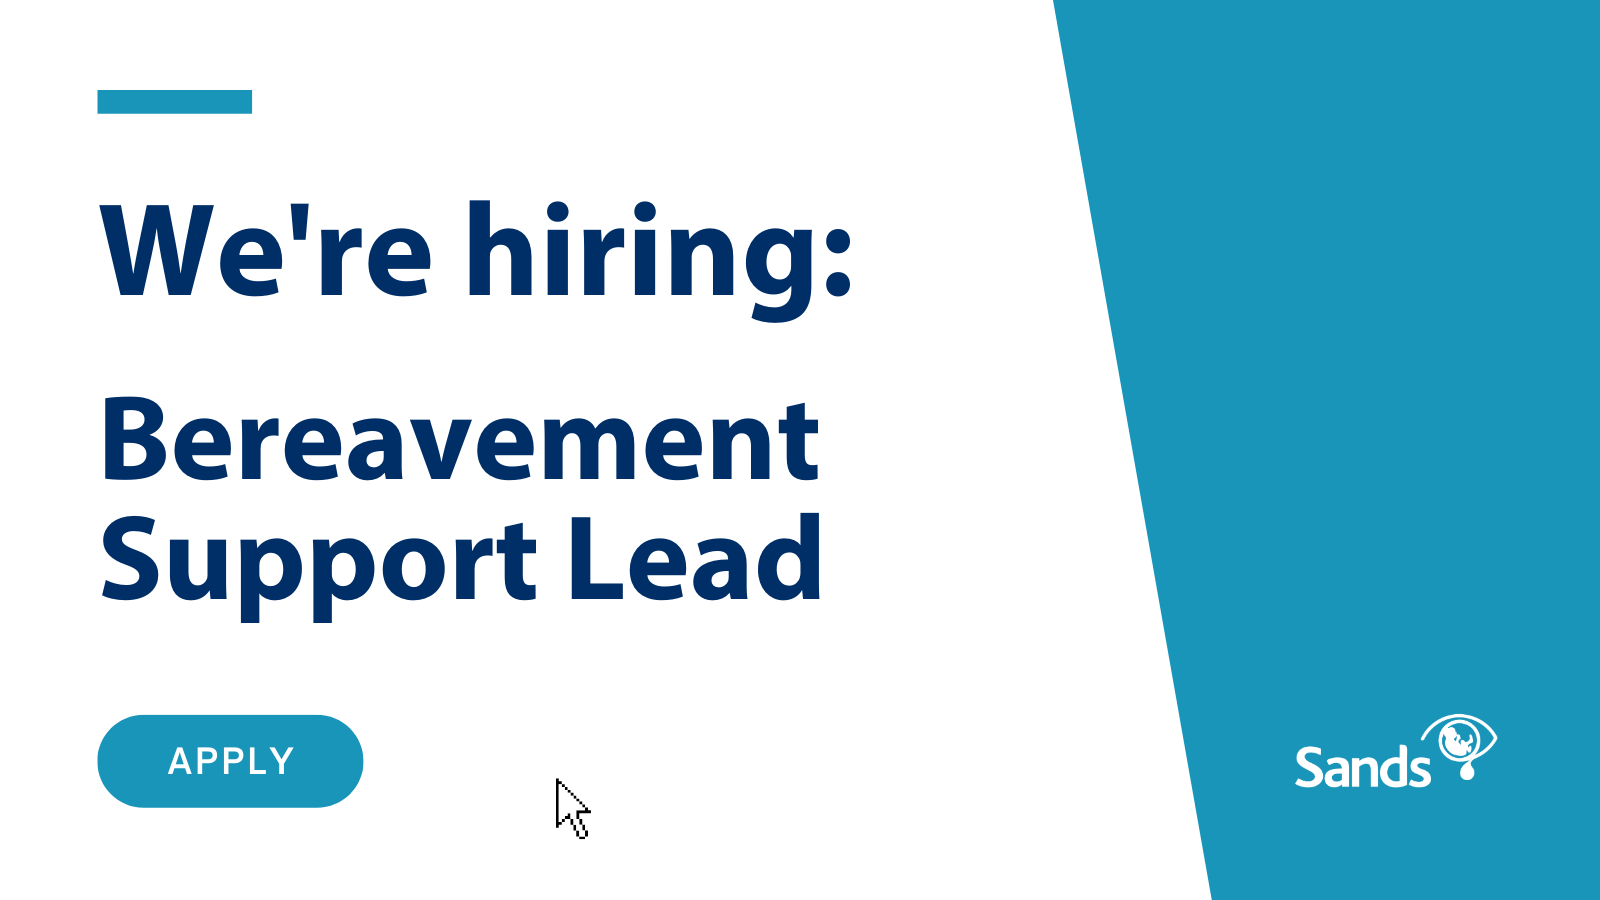 We are hiring Bereavement Support Lead